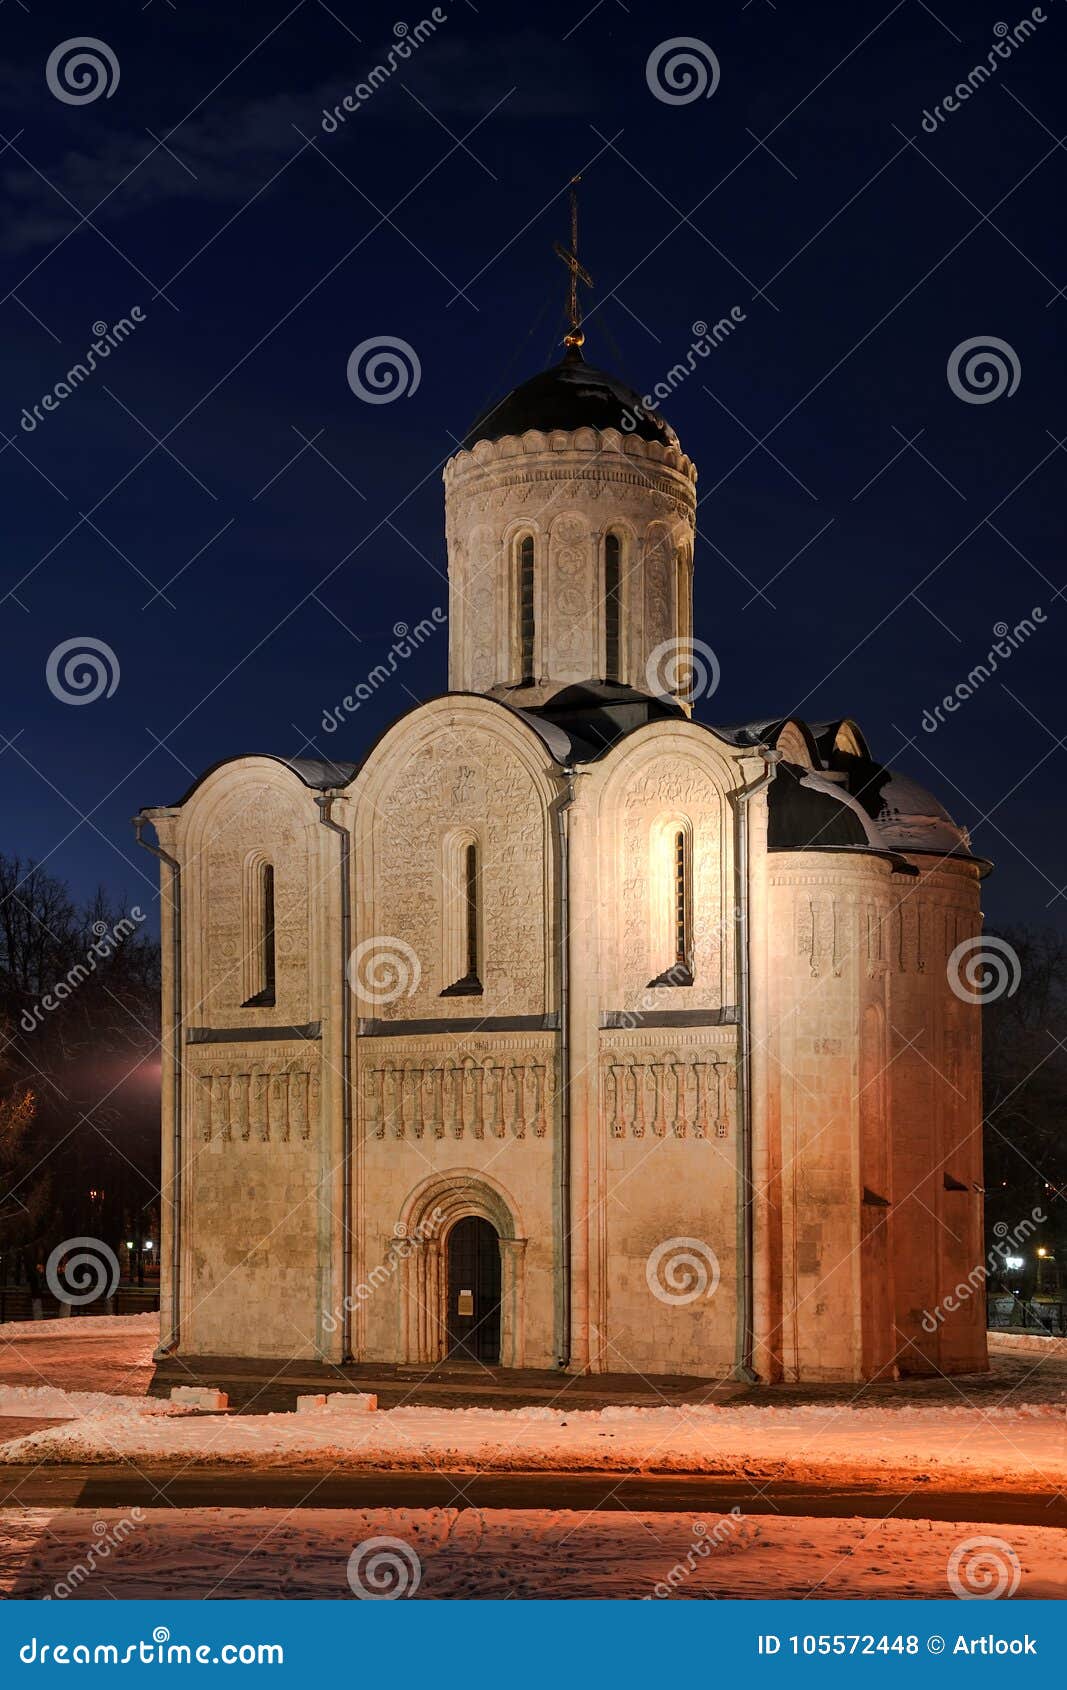 highlighted in the dusk - st. demetrius cathedral